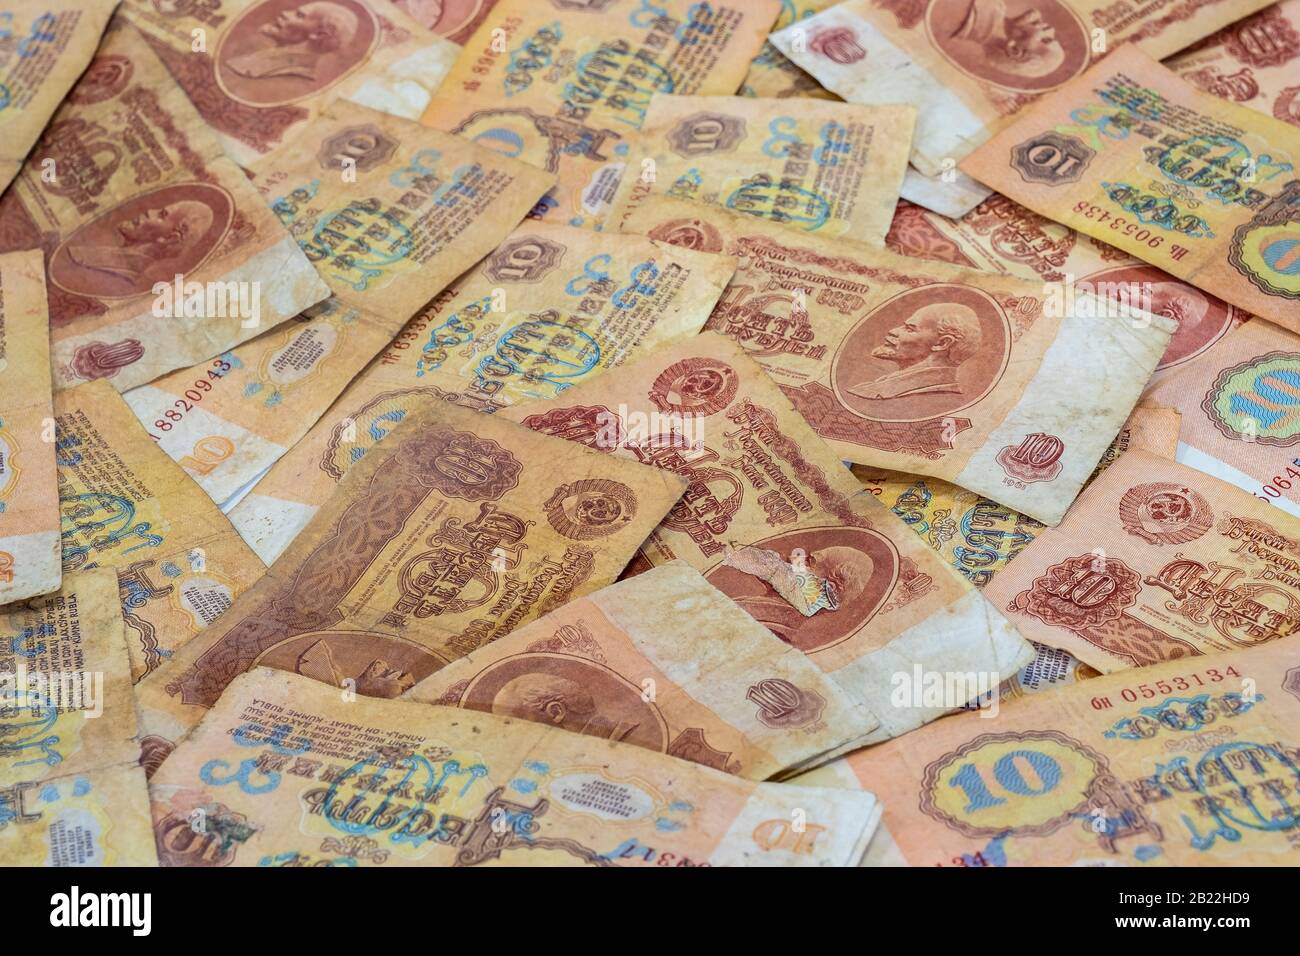 Background of ten ruble denominations of Soviet money of the 1961 sample, shot in close-up. Stock Photo